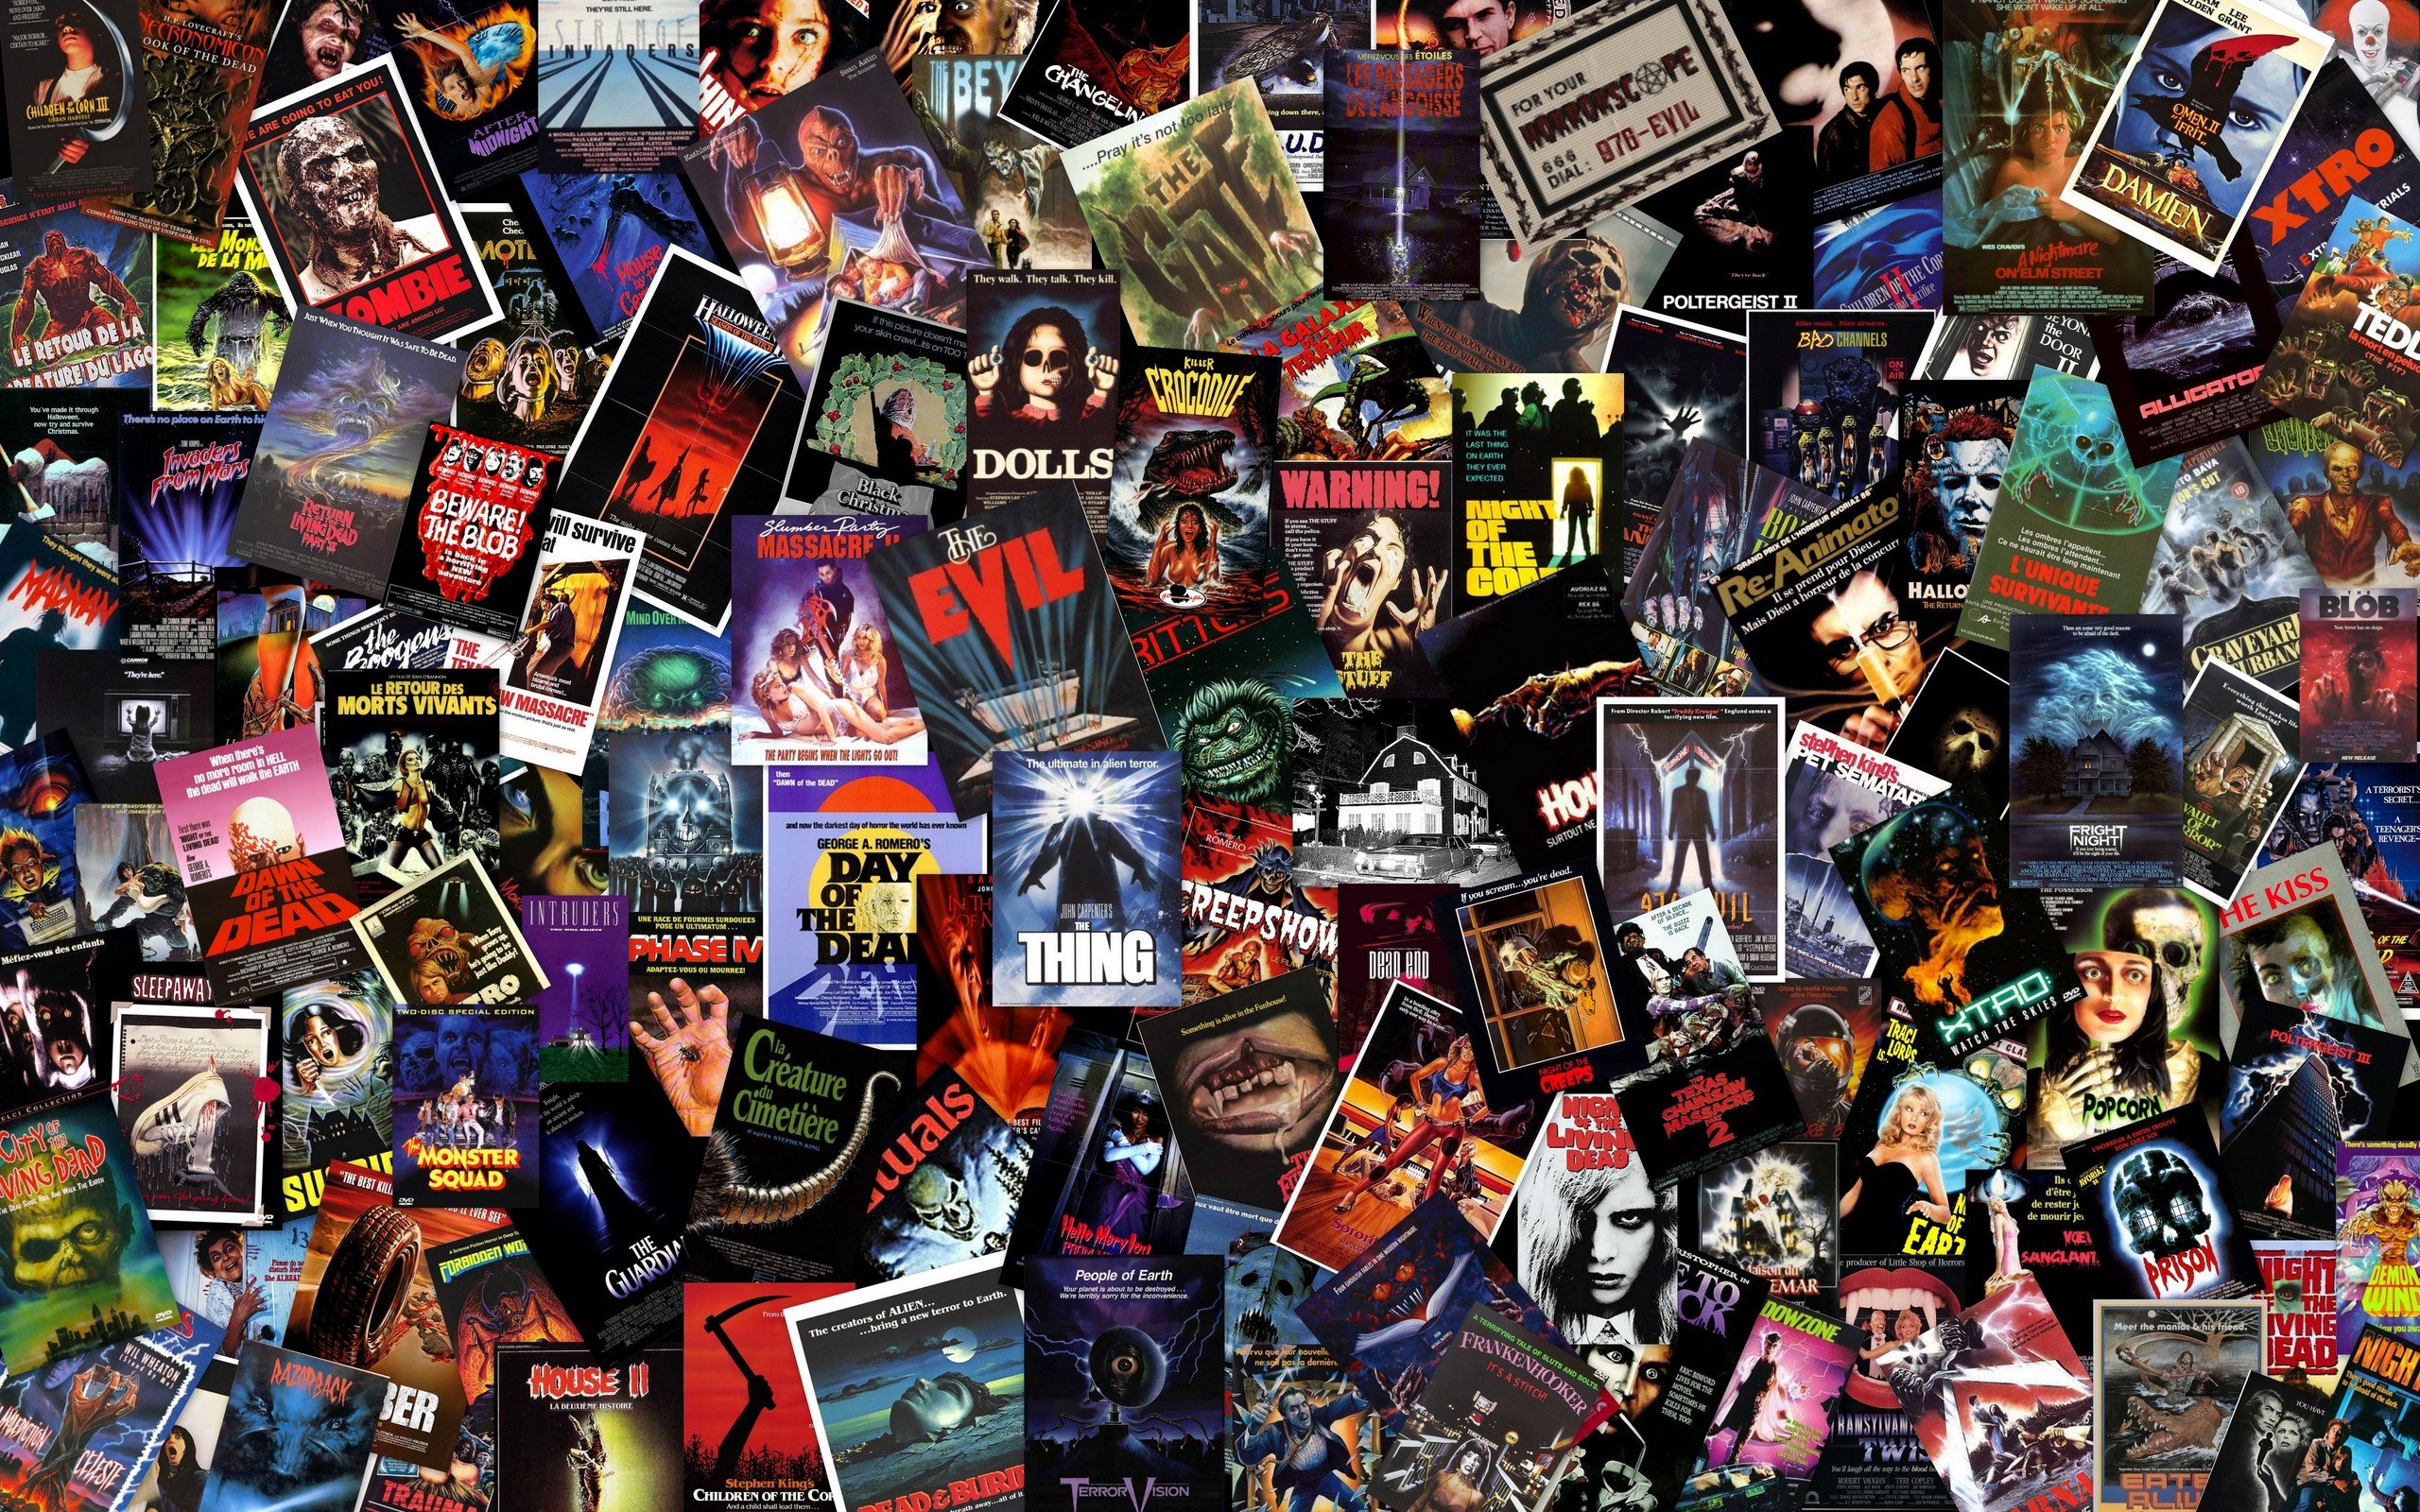 A collage of cult film posters.